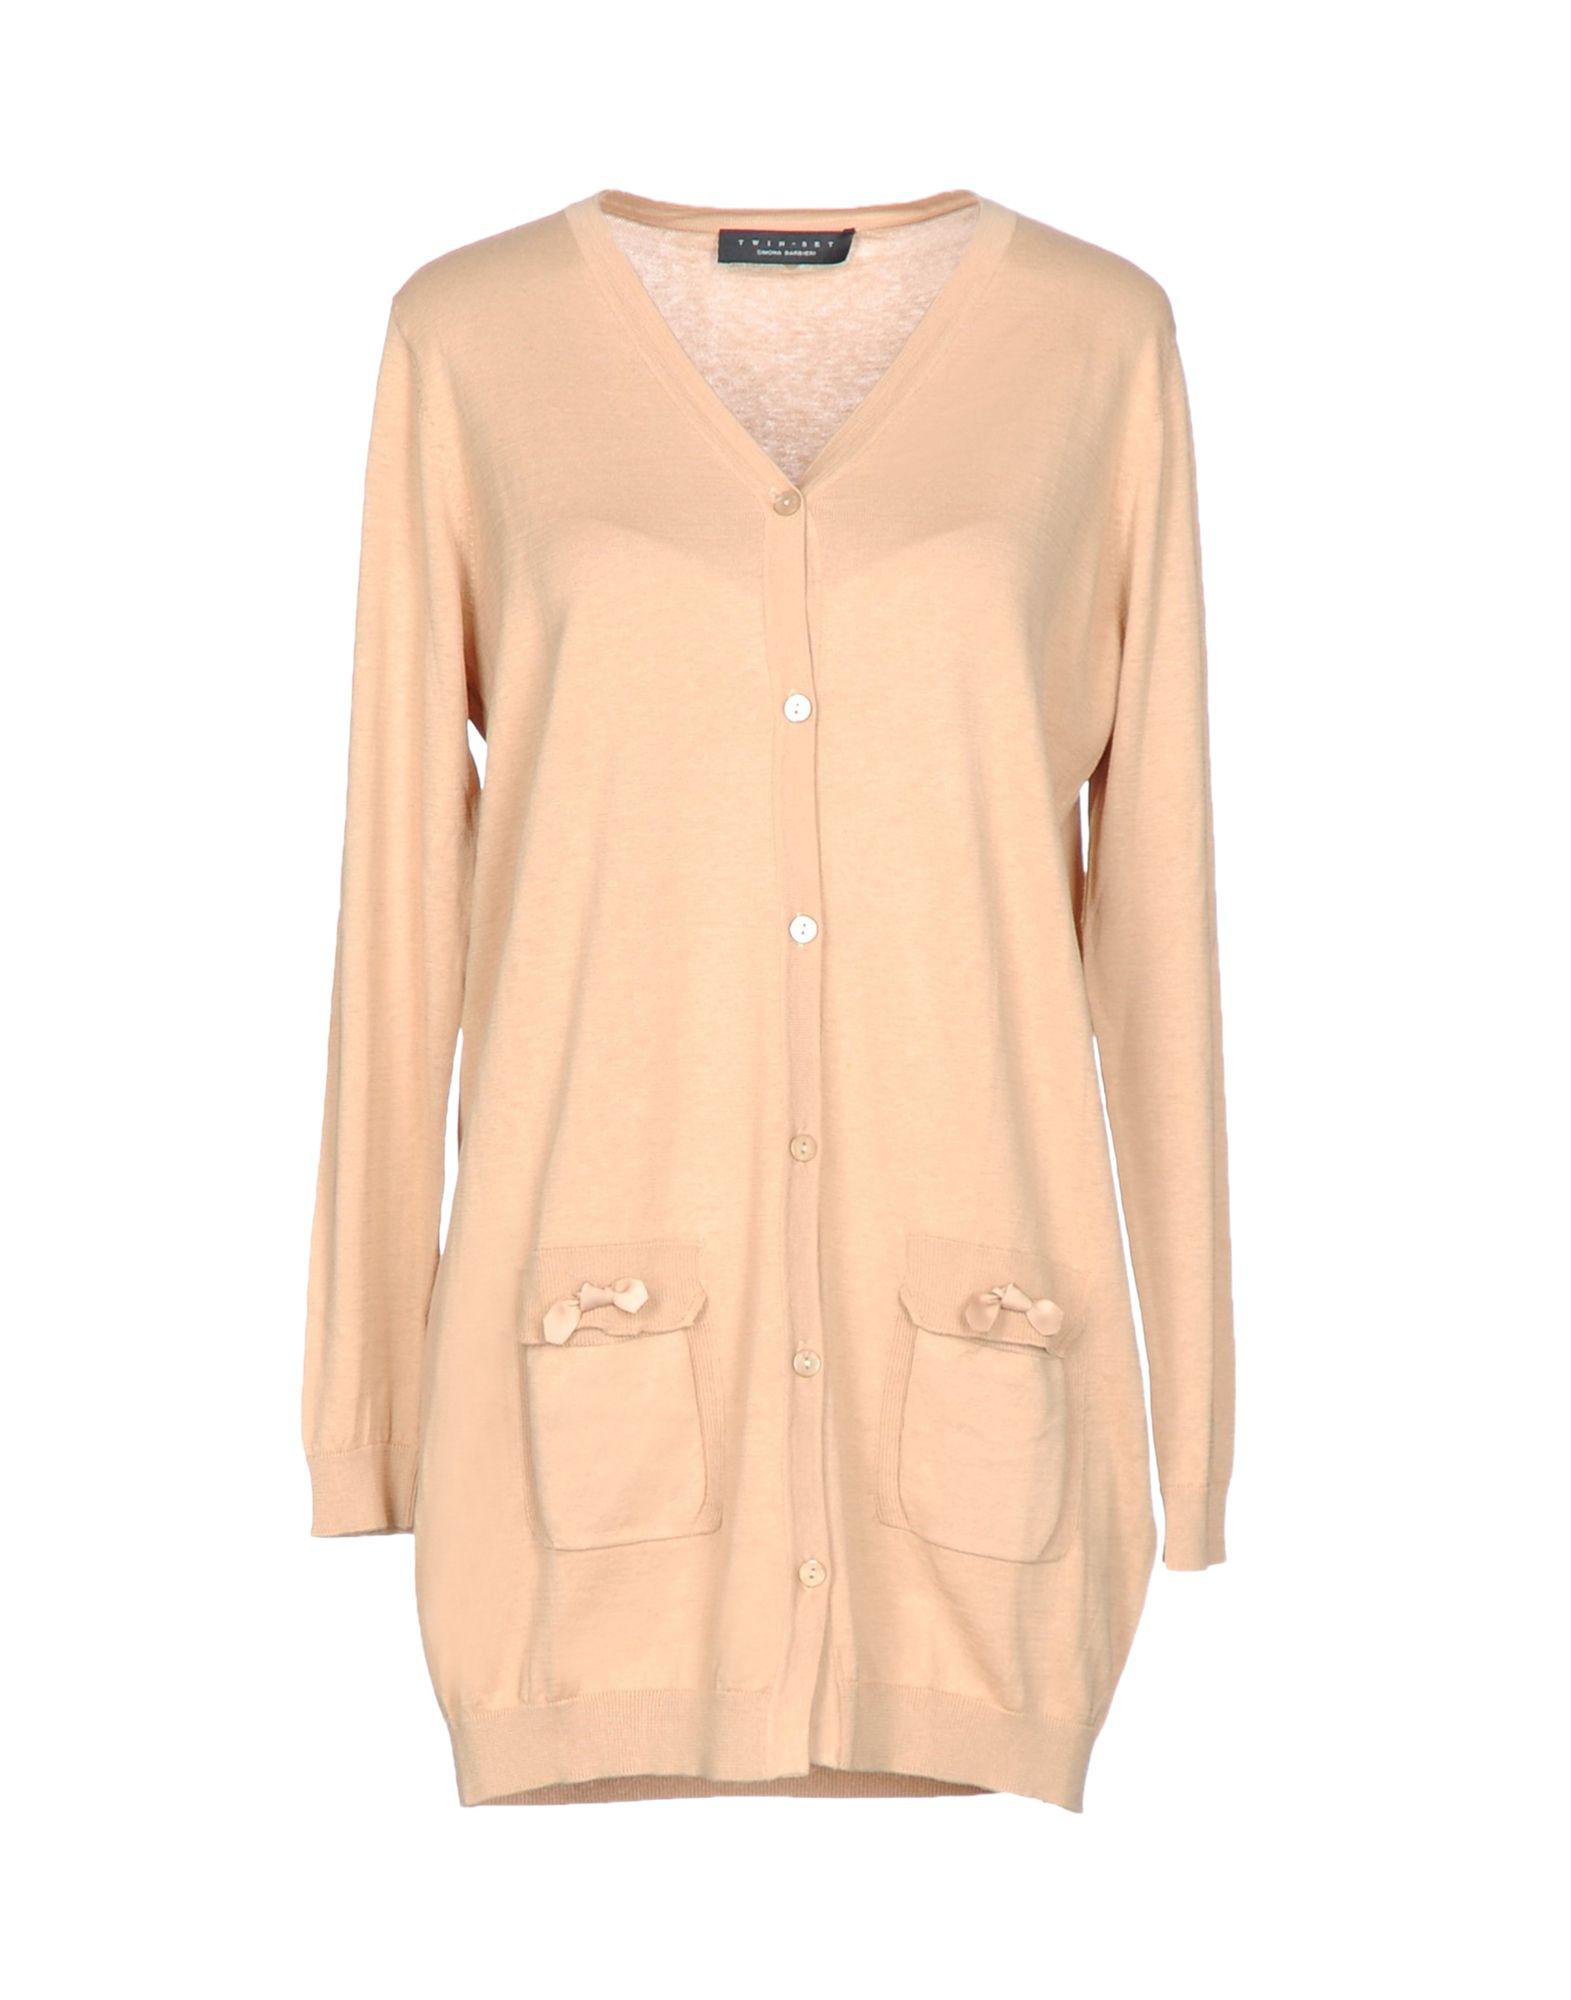 Lyst - Twin Set Cardigan in Natural